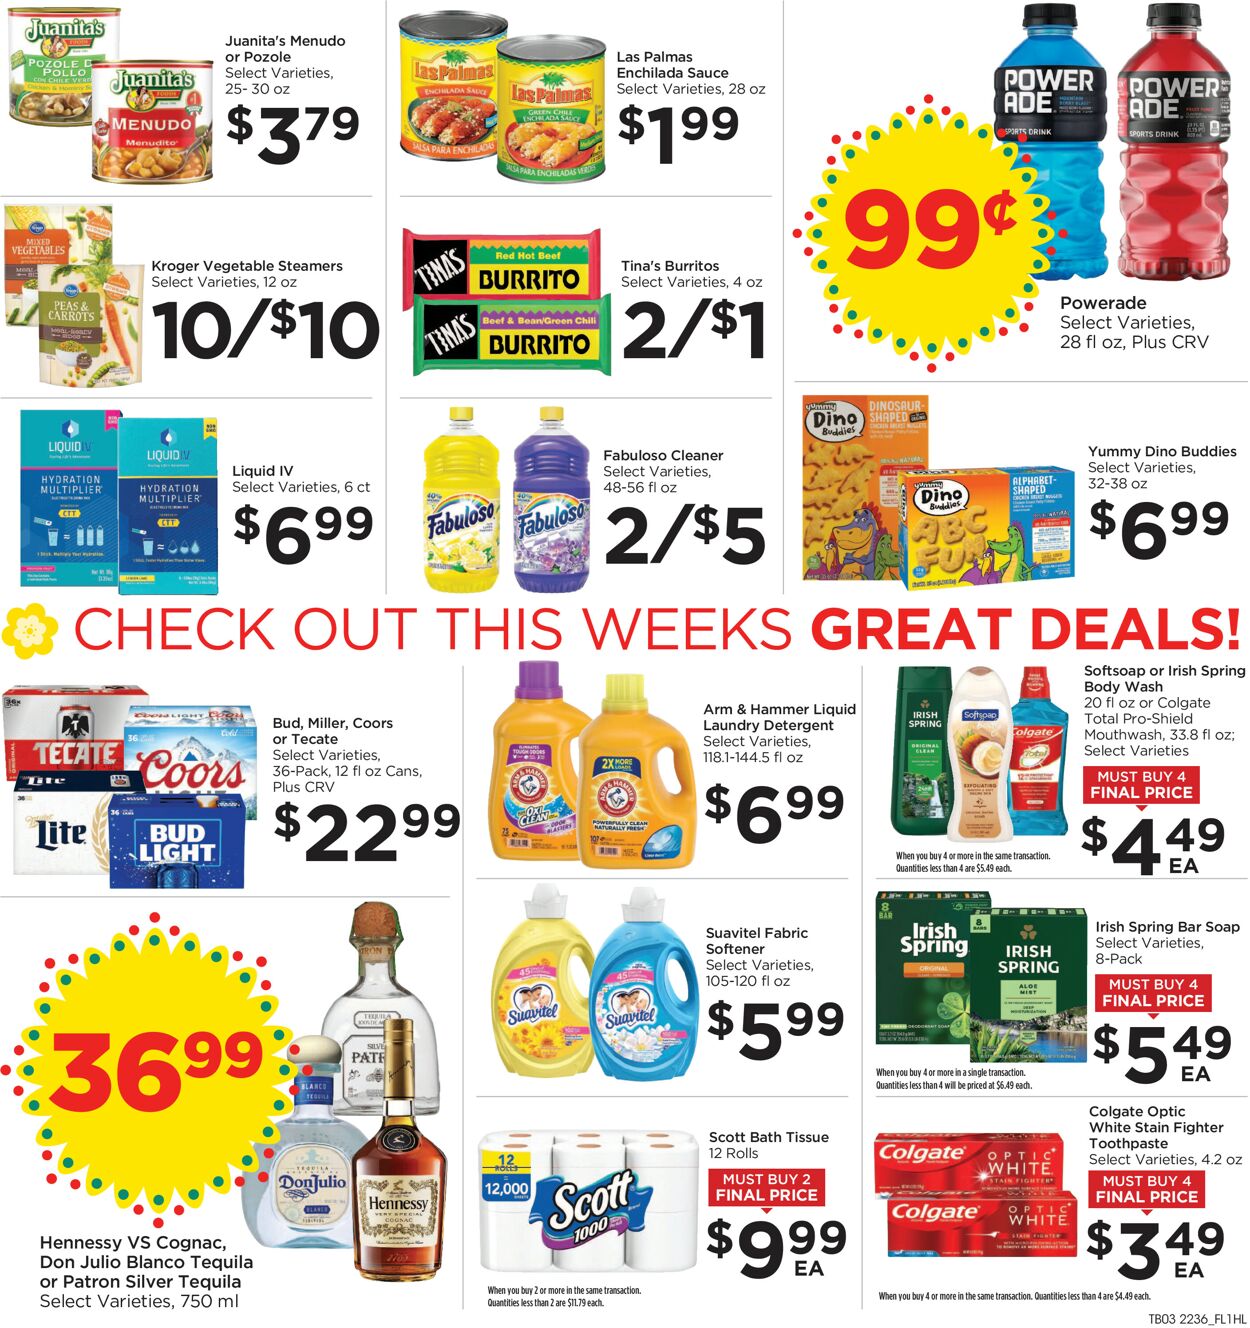 Food 4 Less Ad from 10/05/2022